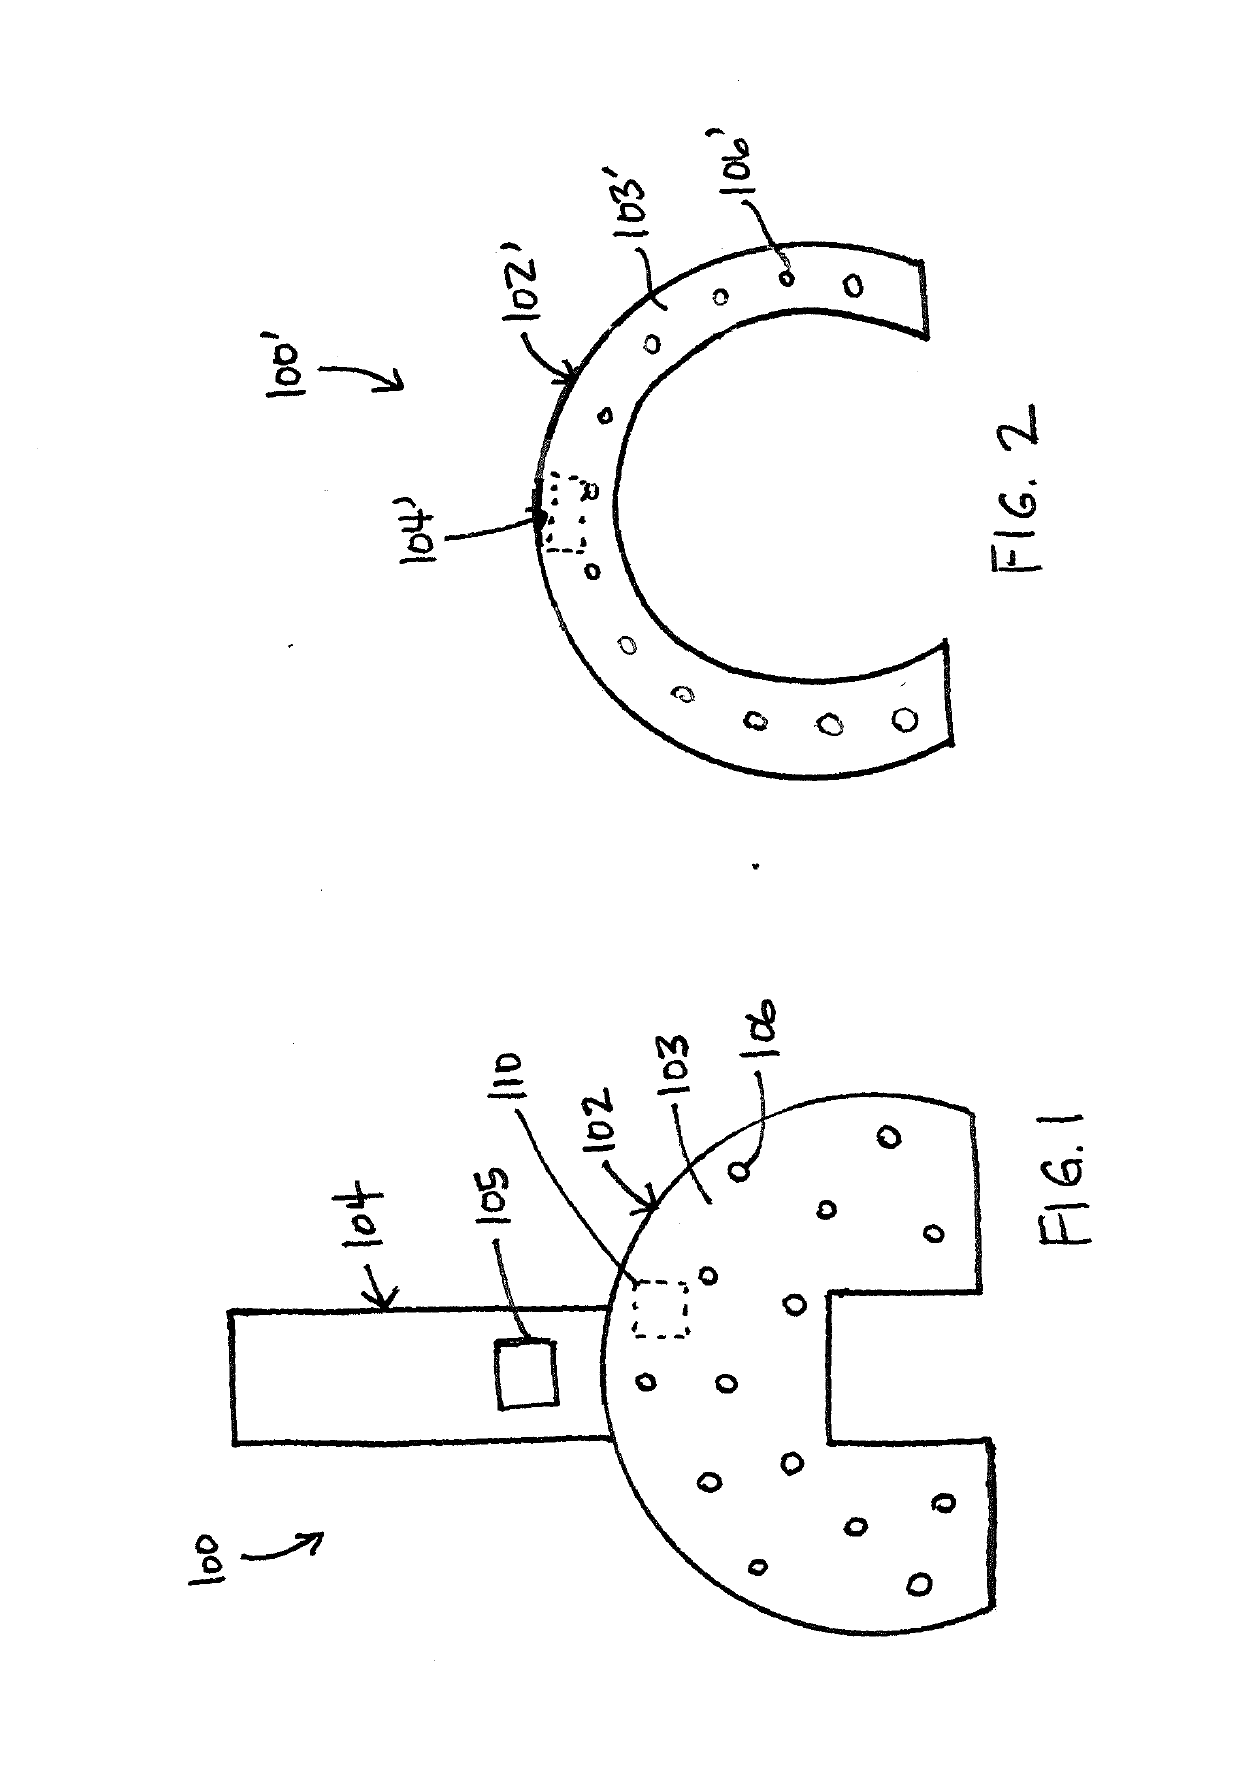 Preemptive pain avoidance and/or diagnostic apparatus and methods of operating same